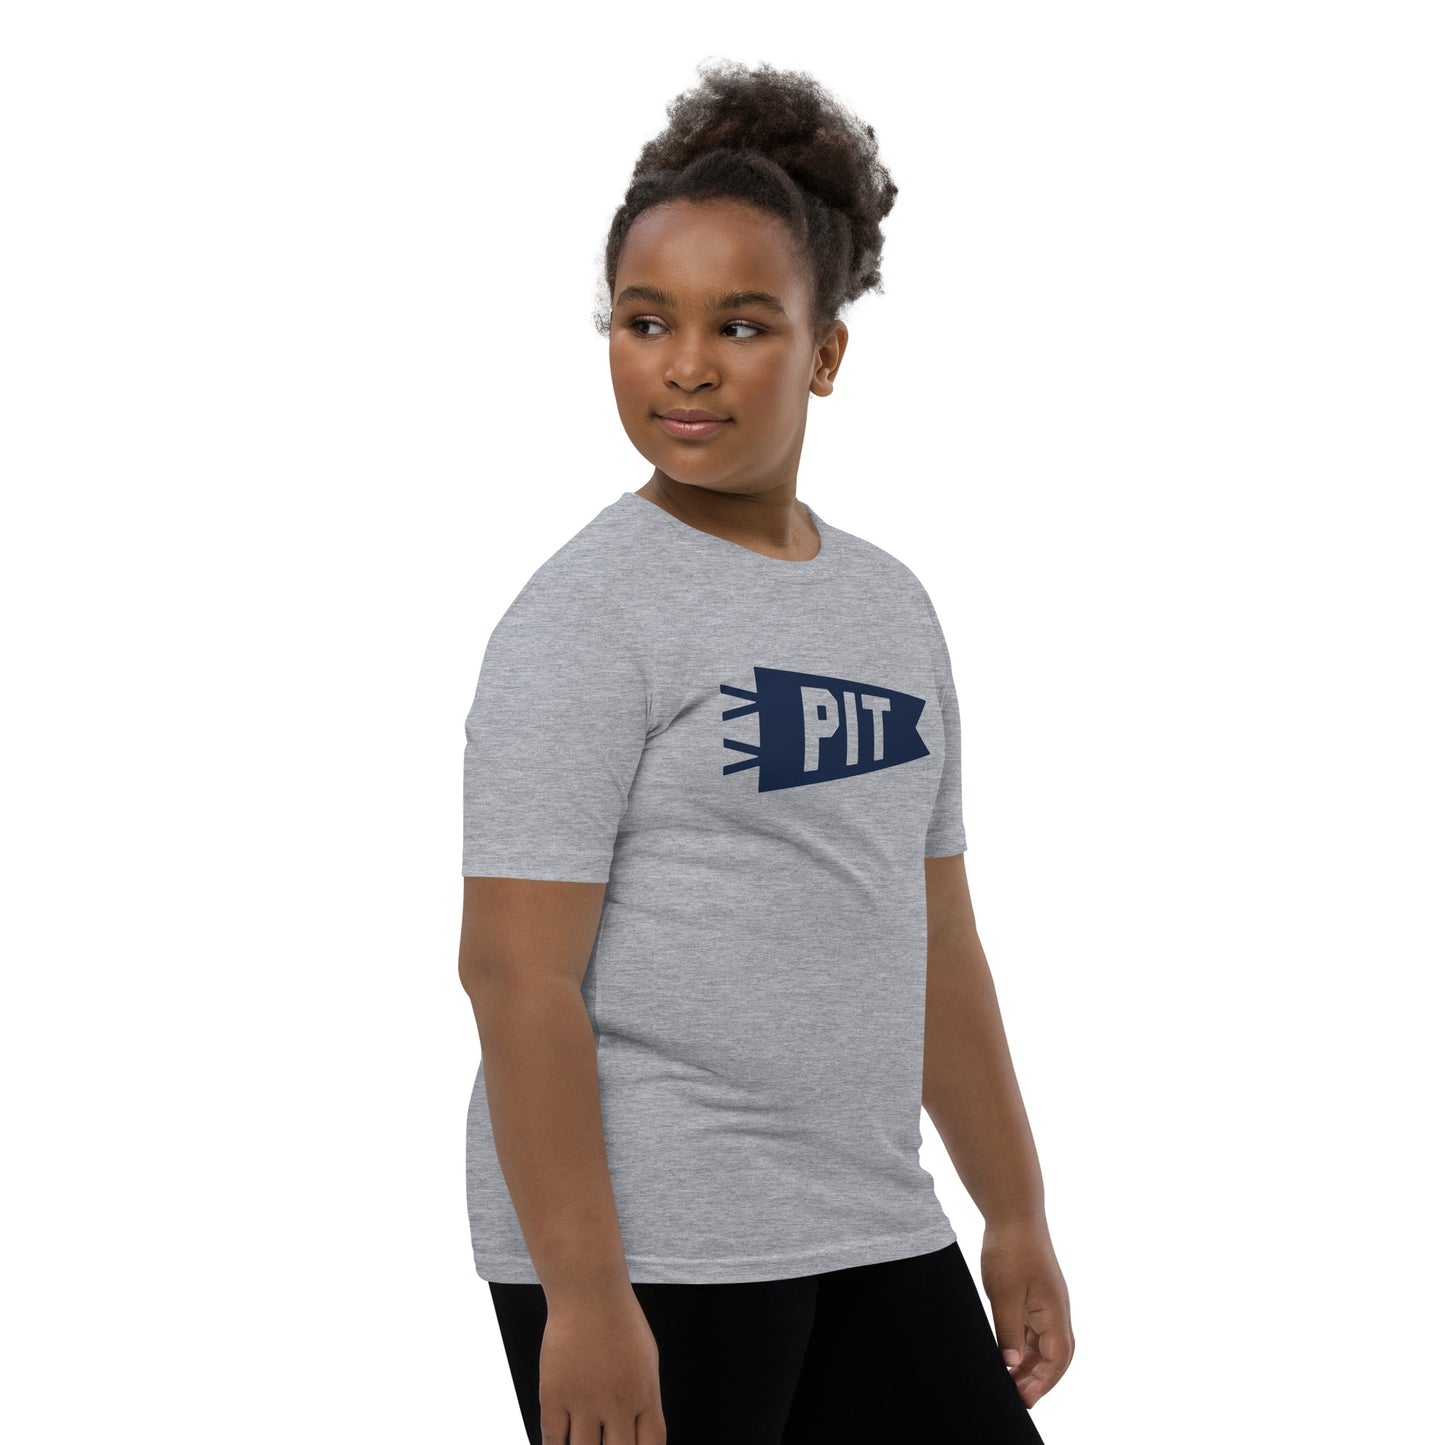 Kid's Airport Code Tee - Navy Blue Graphic • PIT Pittsburgh • YHM Designs - Image 03